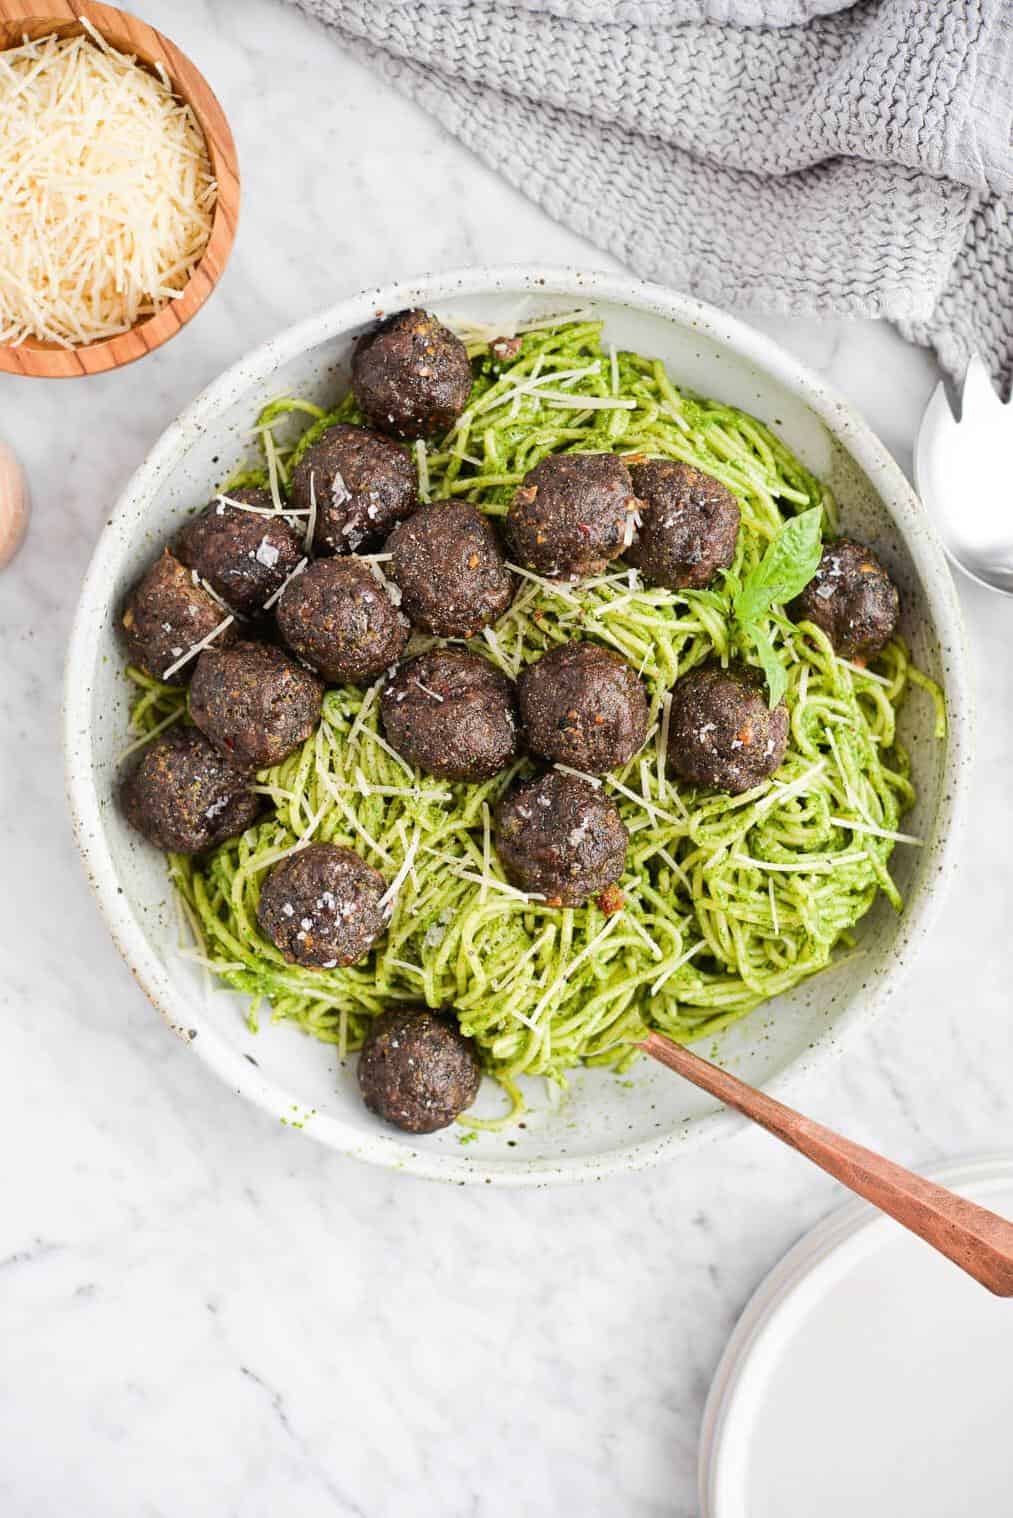  The vibrant green pesto gives these meatballs a beautiful pop of color.